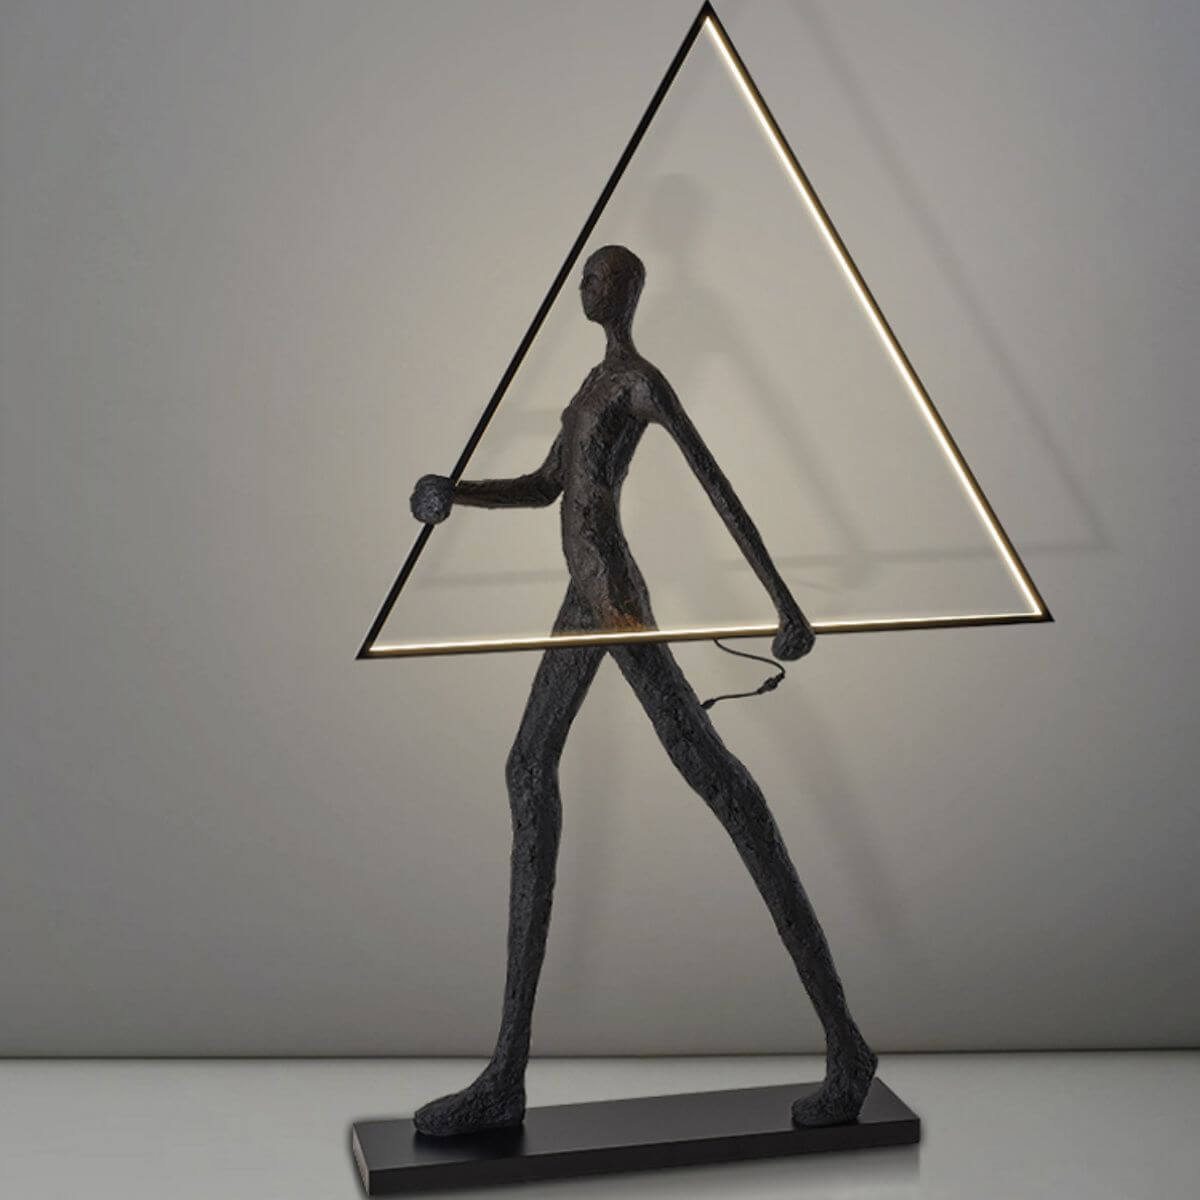 Human Statue Floor Lamp With Triangle 9